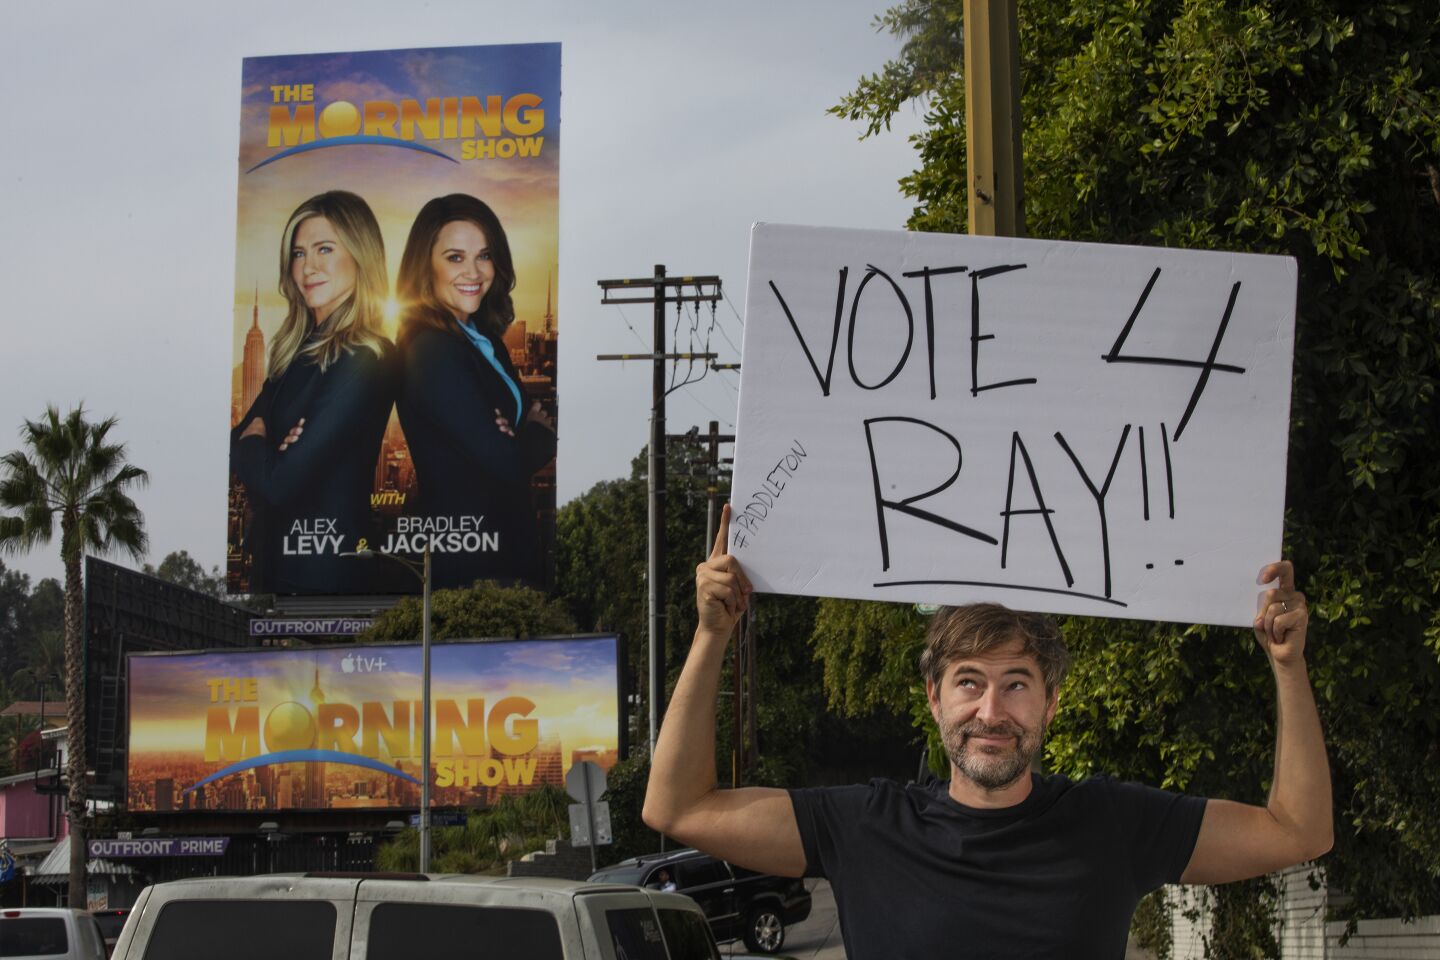 The Duplass Campaign for Ray Romano